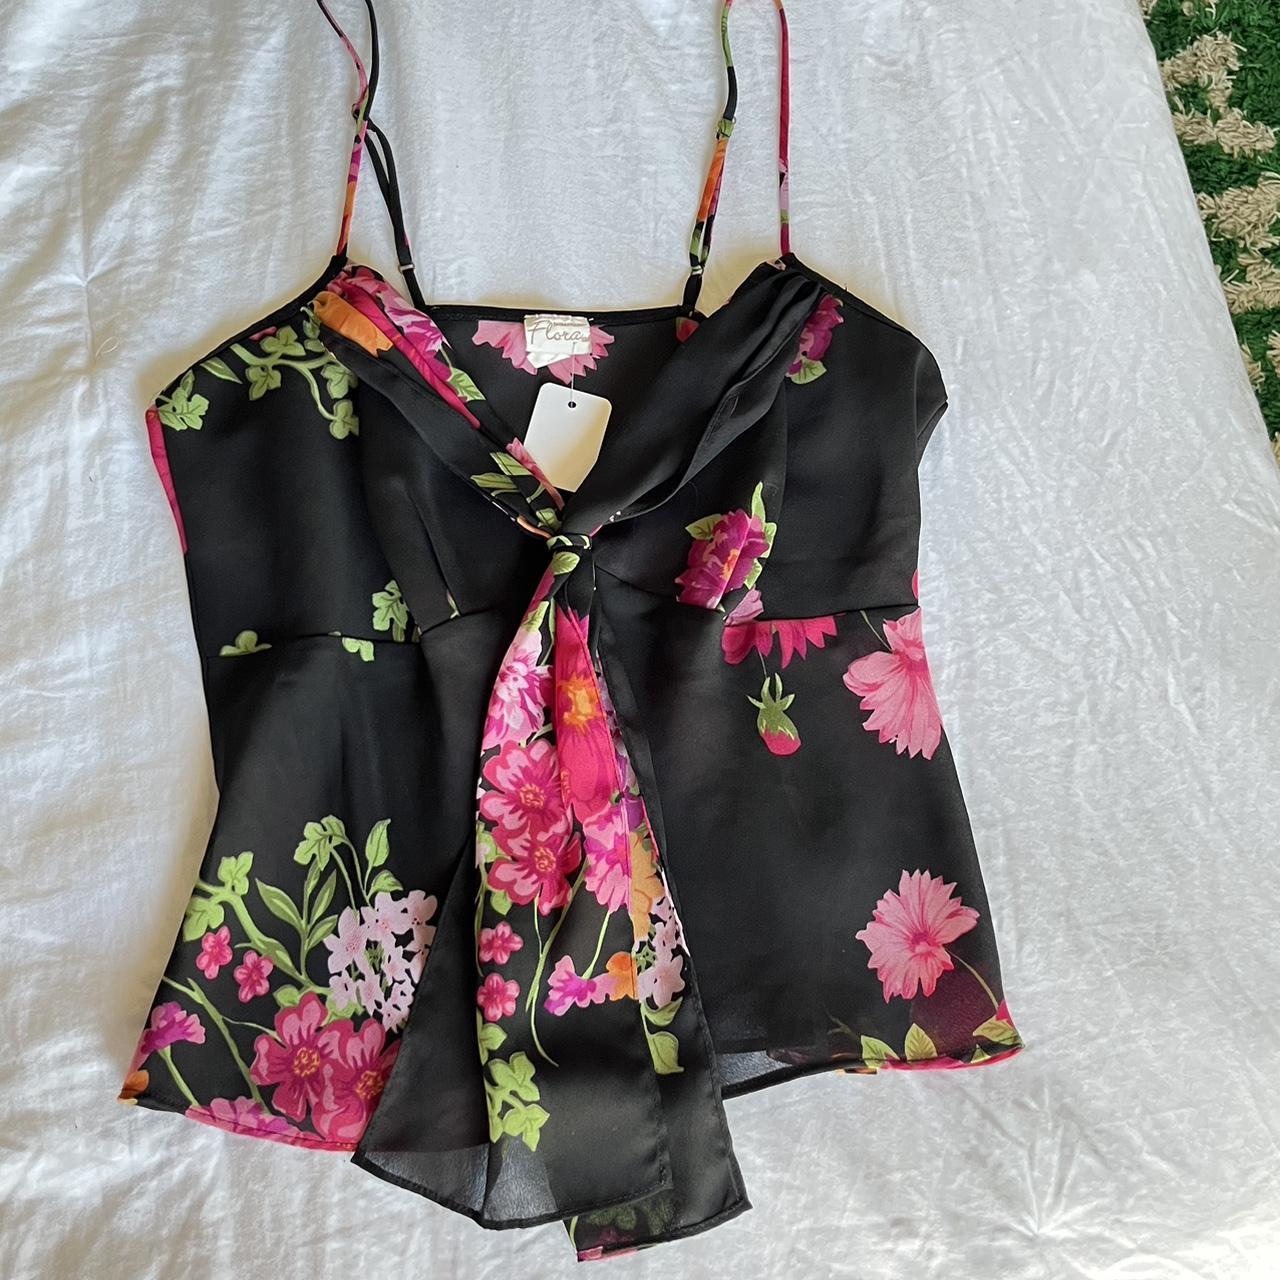 Black and floral print vintage camisole Perfect for... - Depop